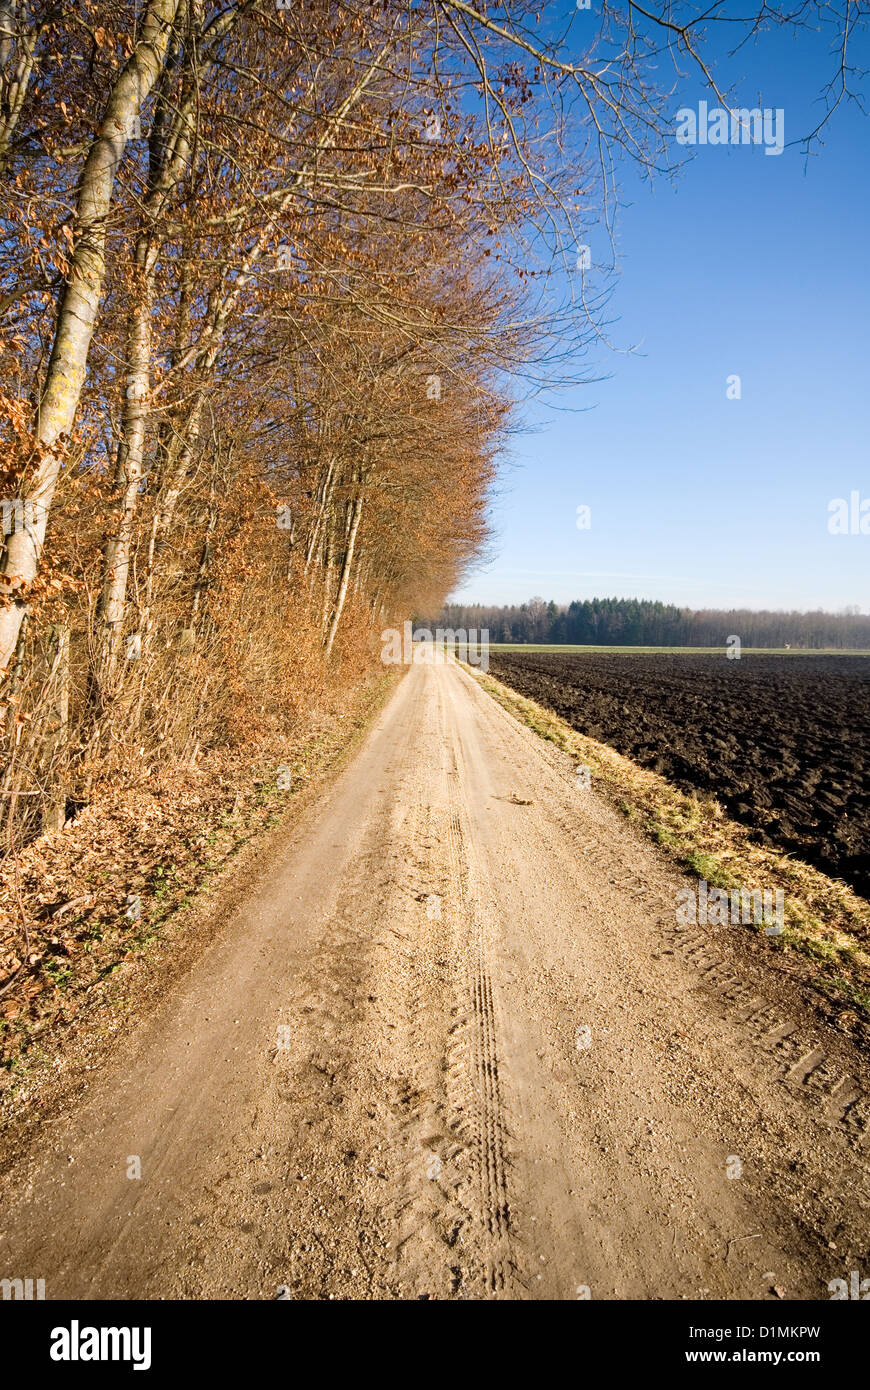 A country lane in farmland, Germany Stock Photo